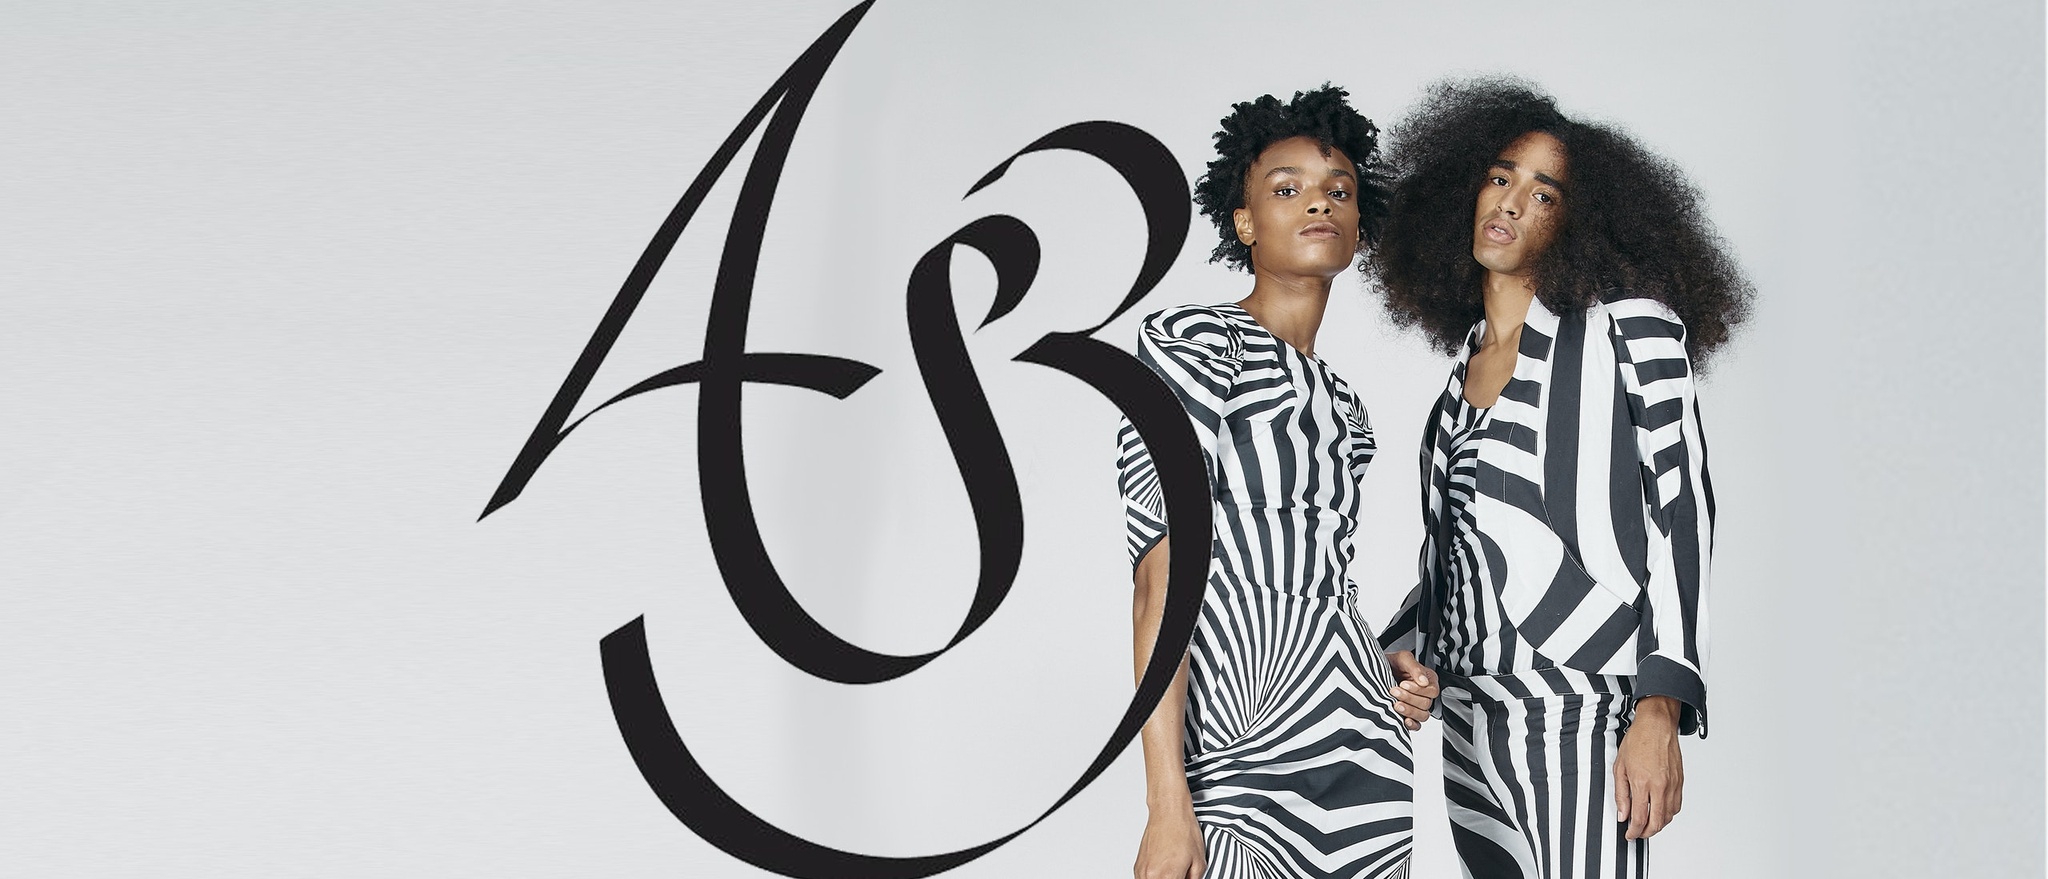 Two Black people dressed in outfits with bold black and white patterns that recall optical illusion patterns stand alongside a stylized script that looks like the cursive letters A and B